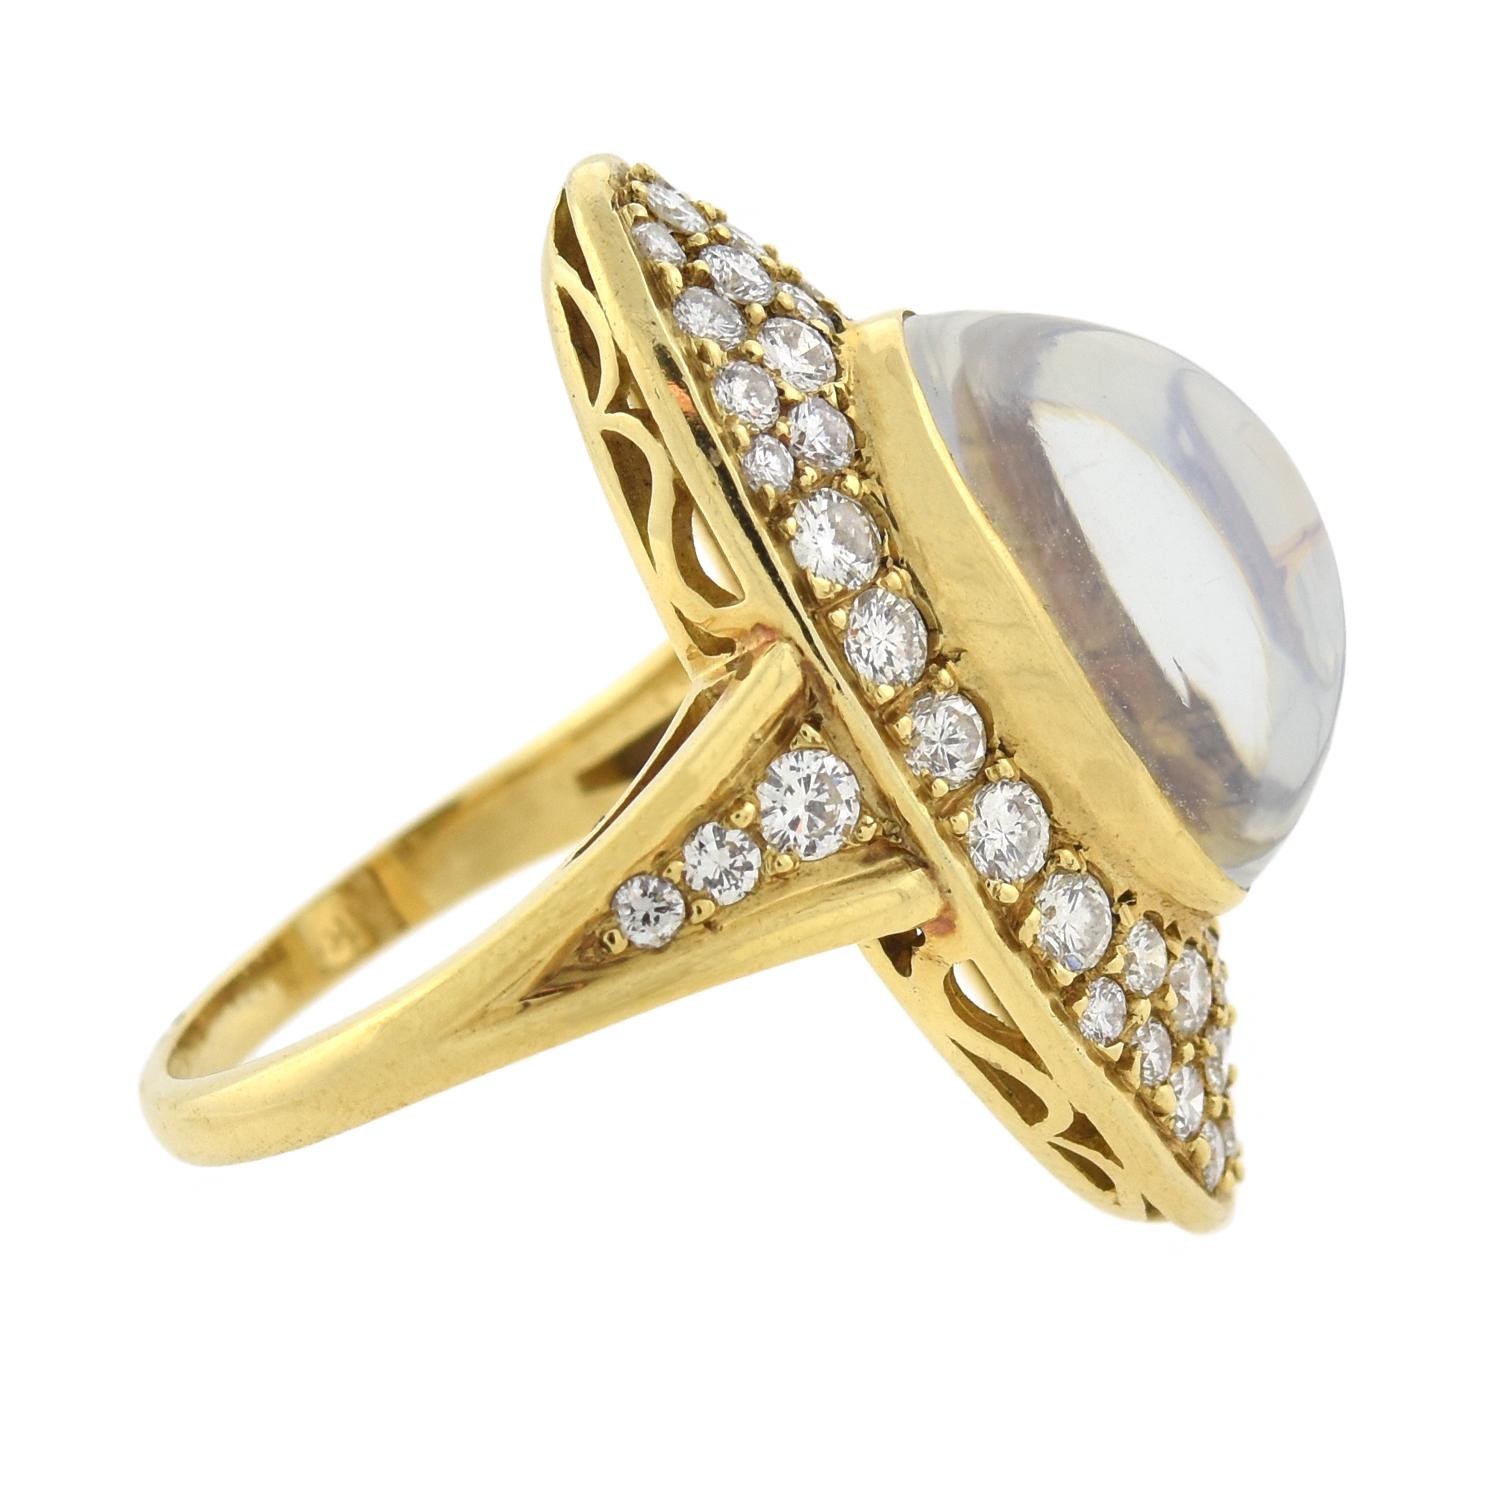 This outstanding moonstone ring from the late Retro (ca1950s) era is absolutely exquisite! Crated in vibrant 18kt yellow gold, the ring has an elongated oval shape which features a large cabochon moonstone in the center. The moonstone is bezel set,